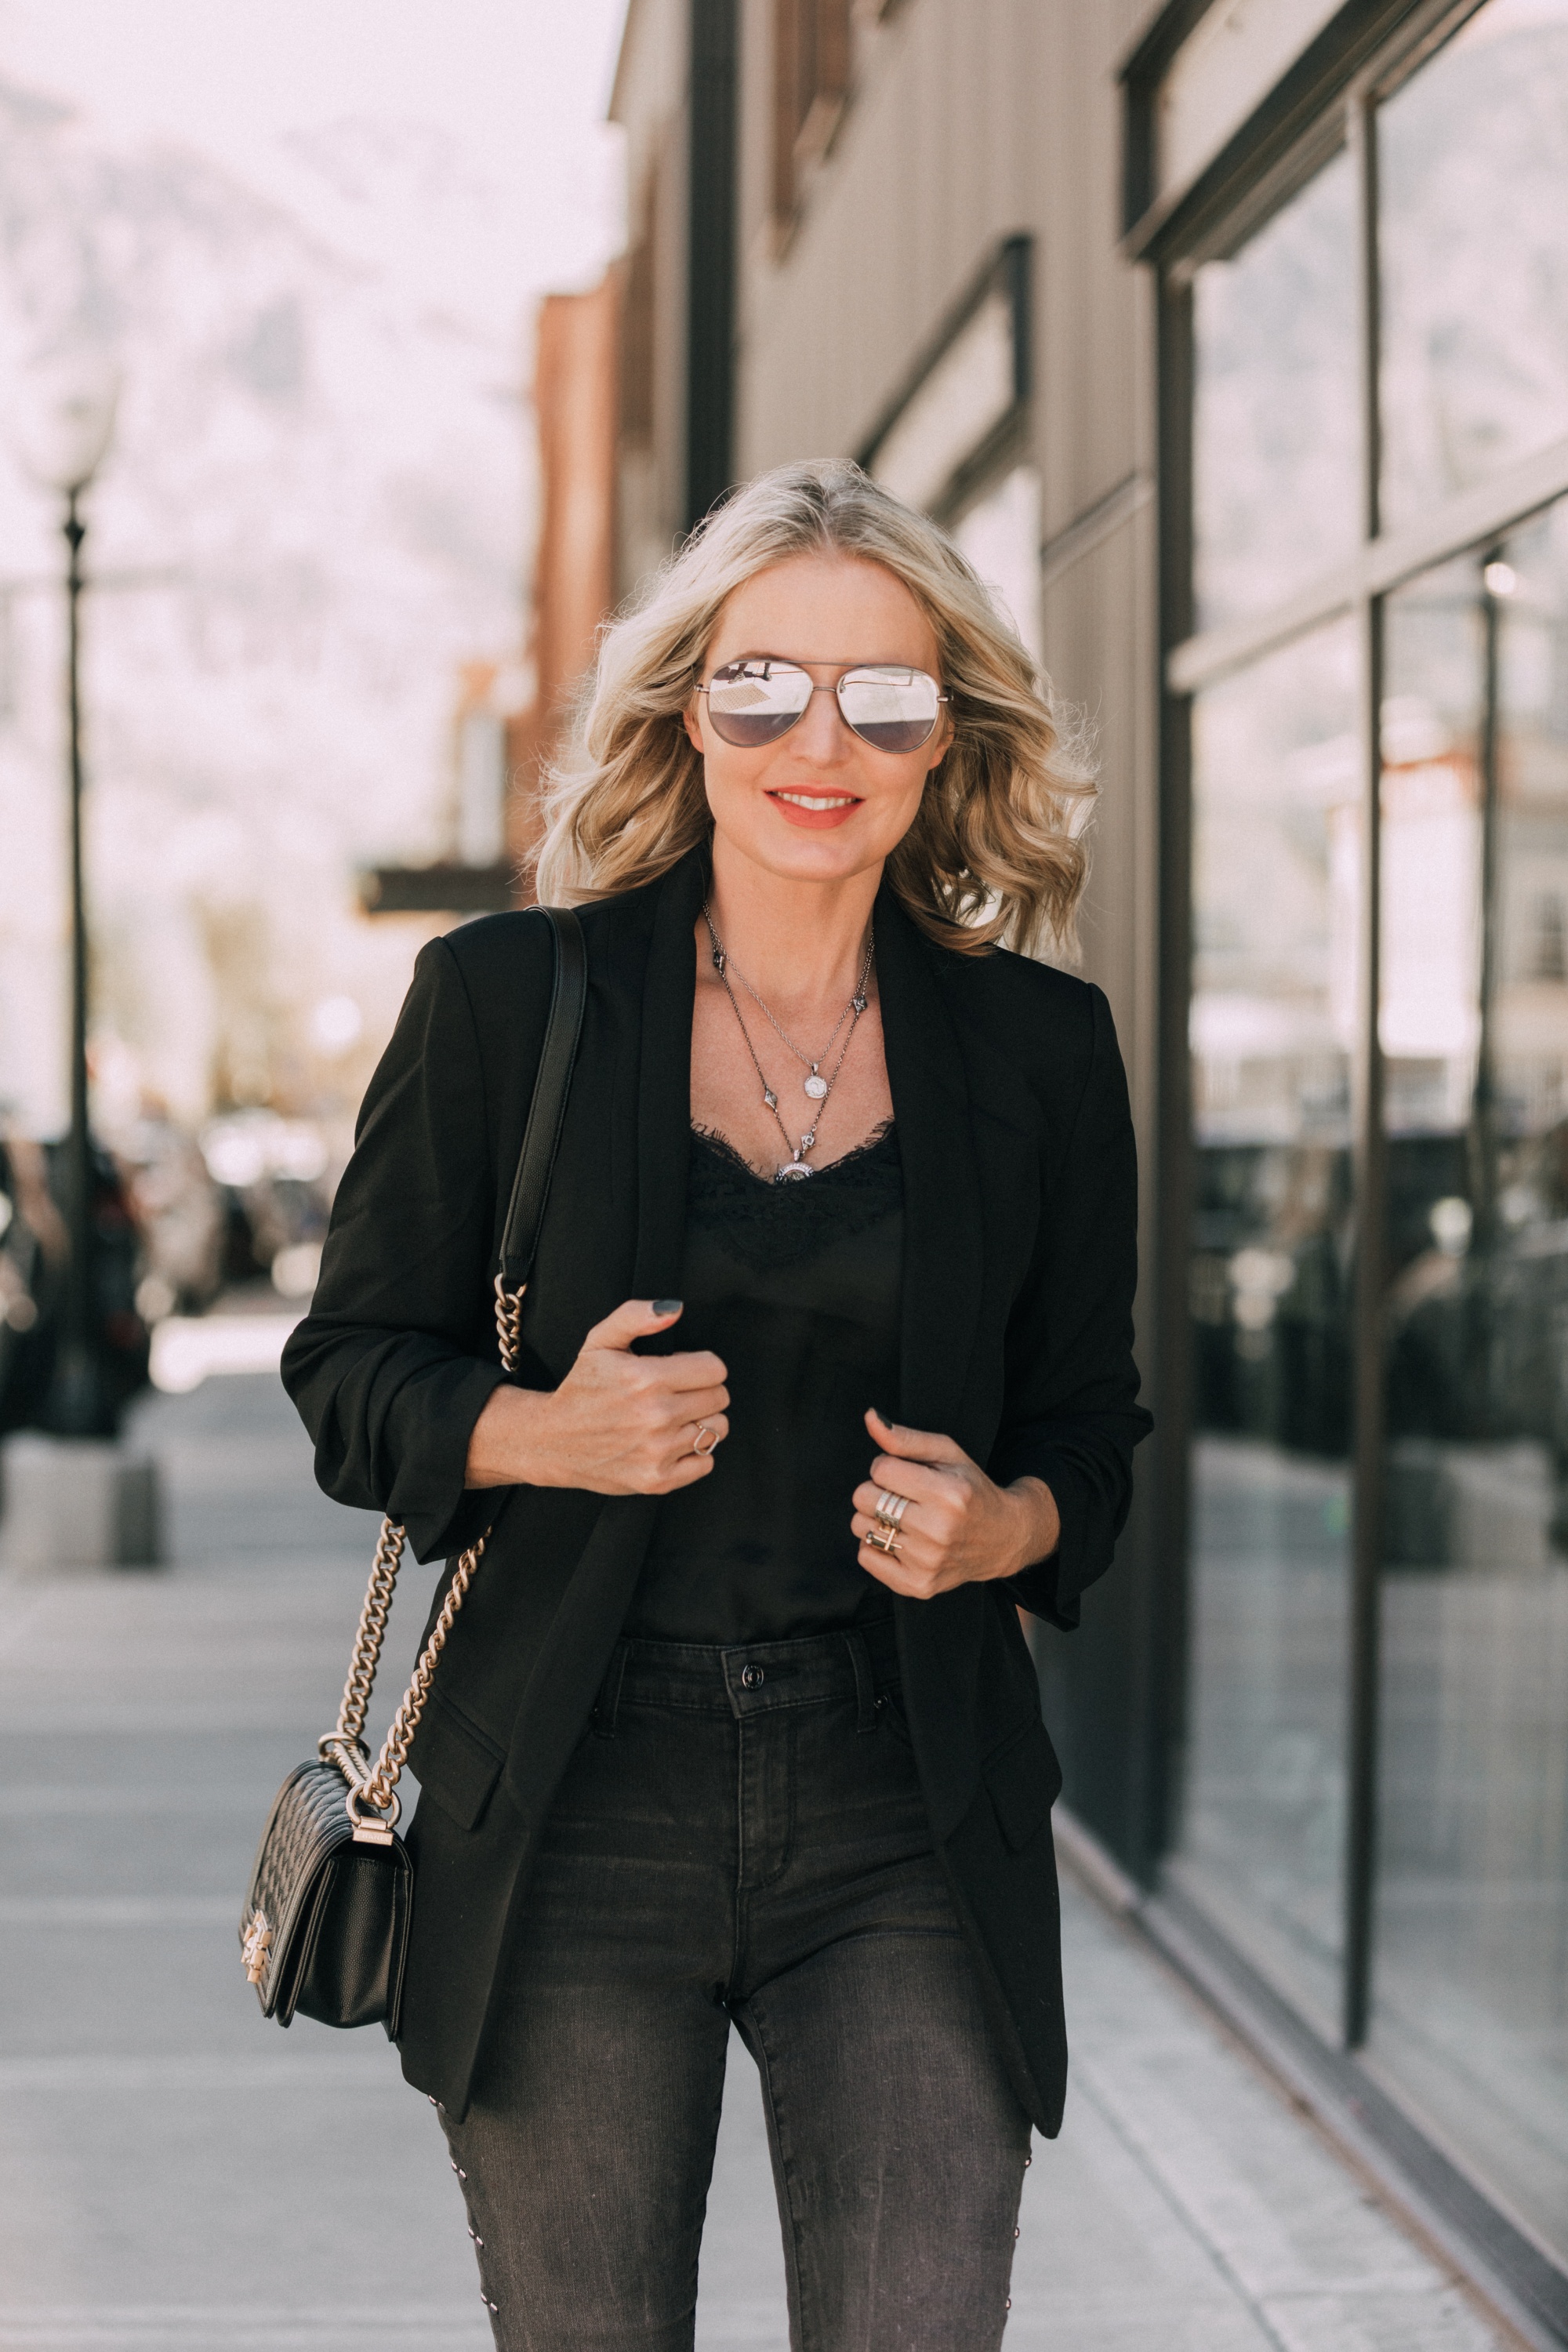 Boyfriend Blazer, Fashion blogger Erin Busbee of BusbeeStyle.com wearing a black boyfriend blazer and black studded jeans Scoop with a black cami and black bag from Walmart in Telluride, CO